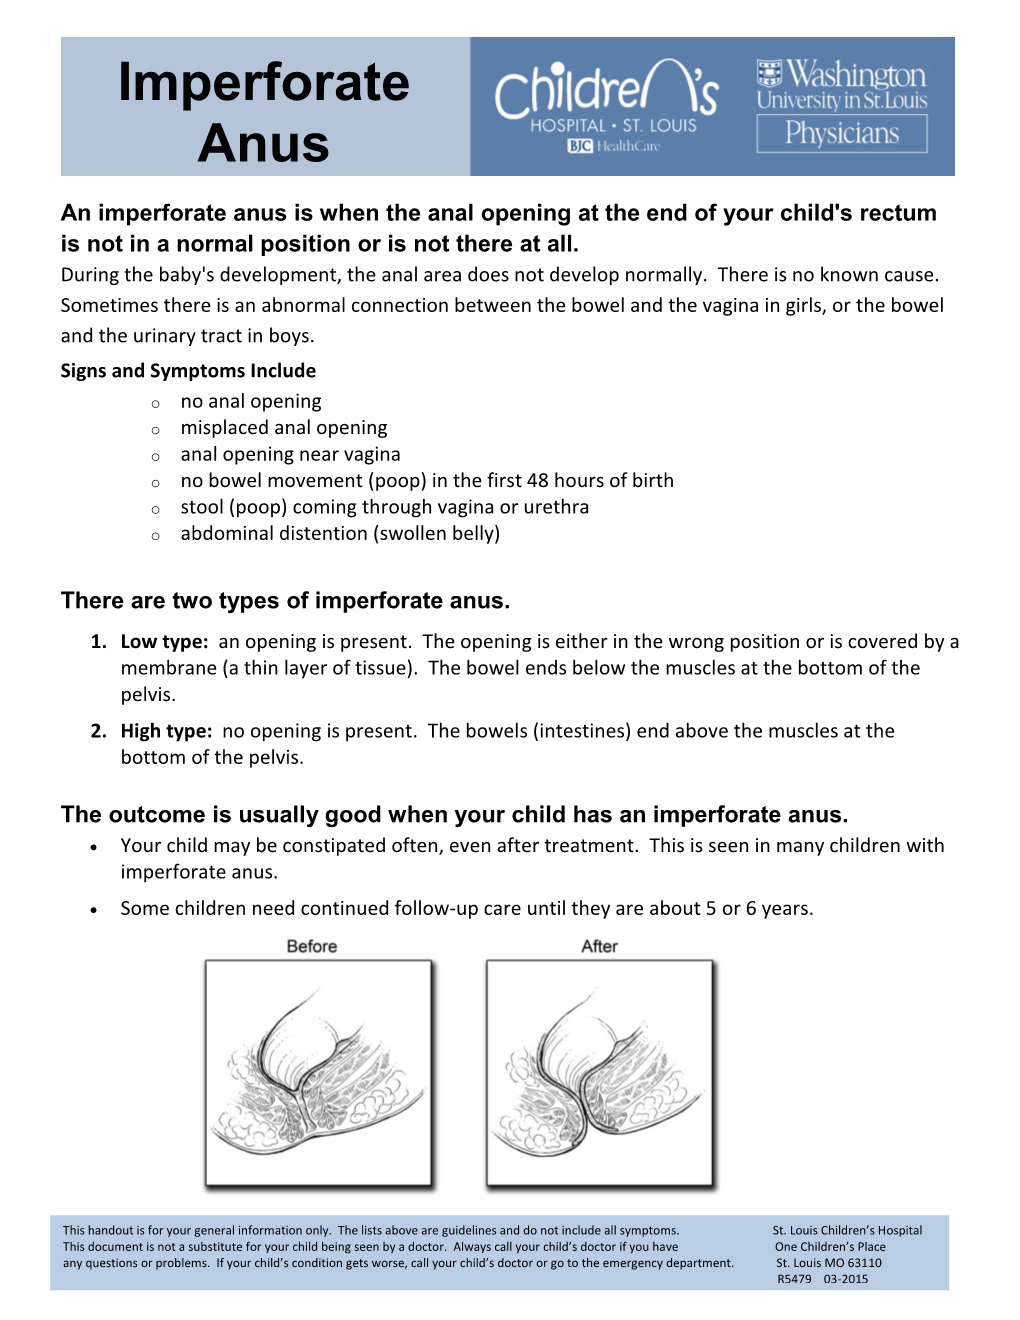 Imperforate Anus Is When the Anal Opening at the End of Your Child's Rectum Is Not in a Normal Position Or Is Not There at All